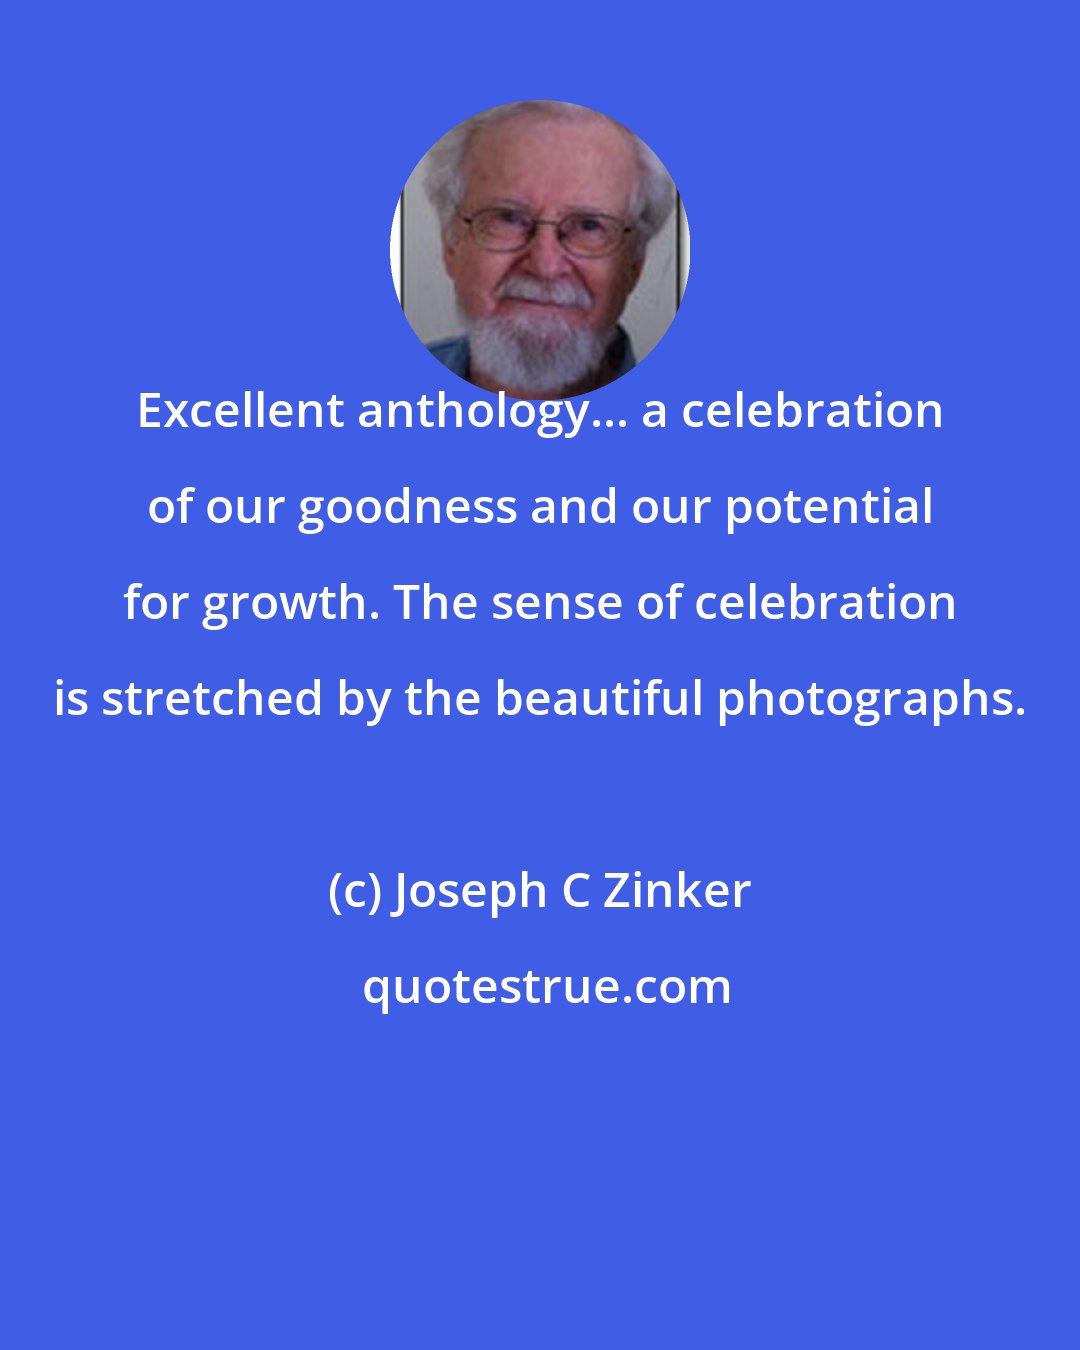 Joseph C Zinker: Excellent anthology... a celebration of our goodness and our potential for growth. The sense of celebration is stretched by the beautiful photographs.